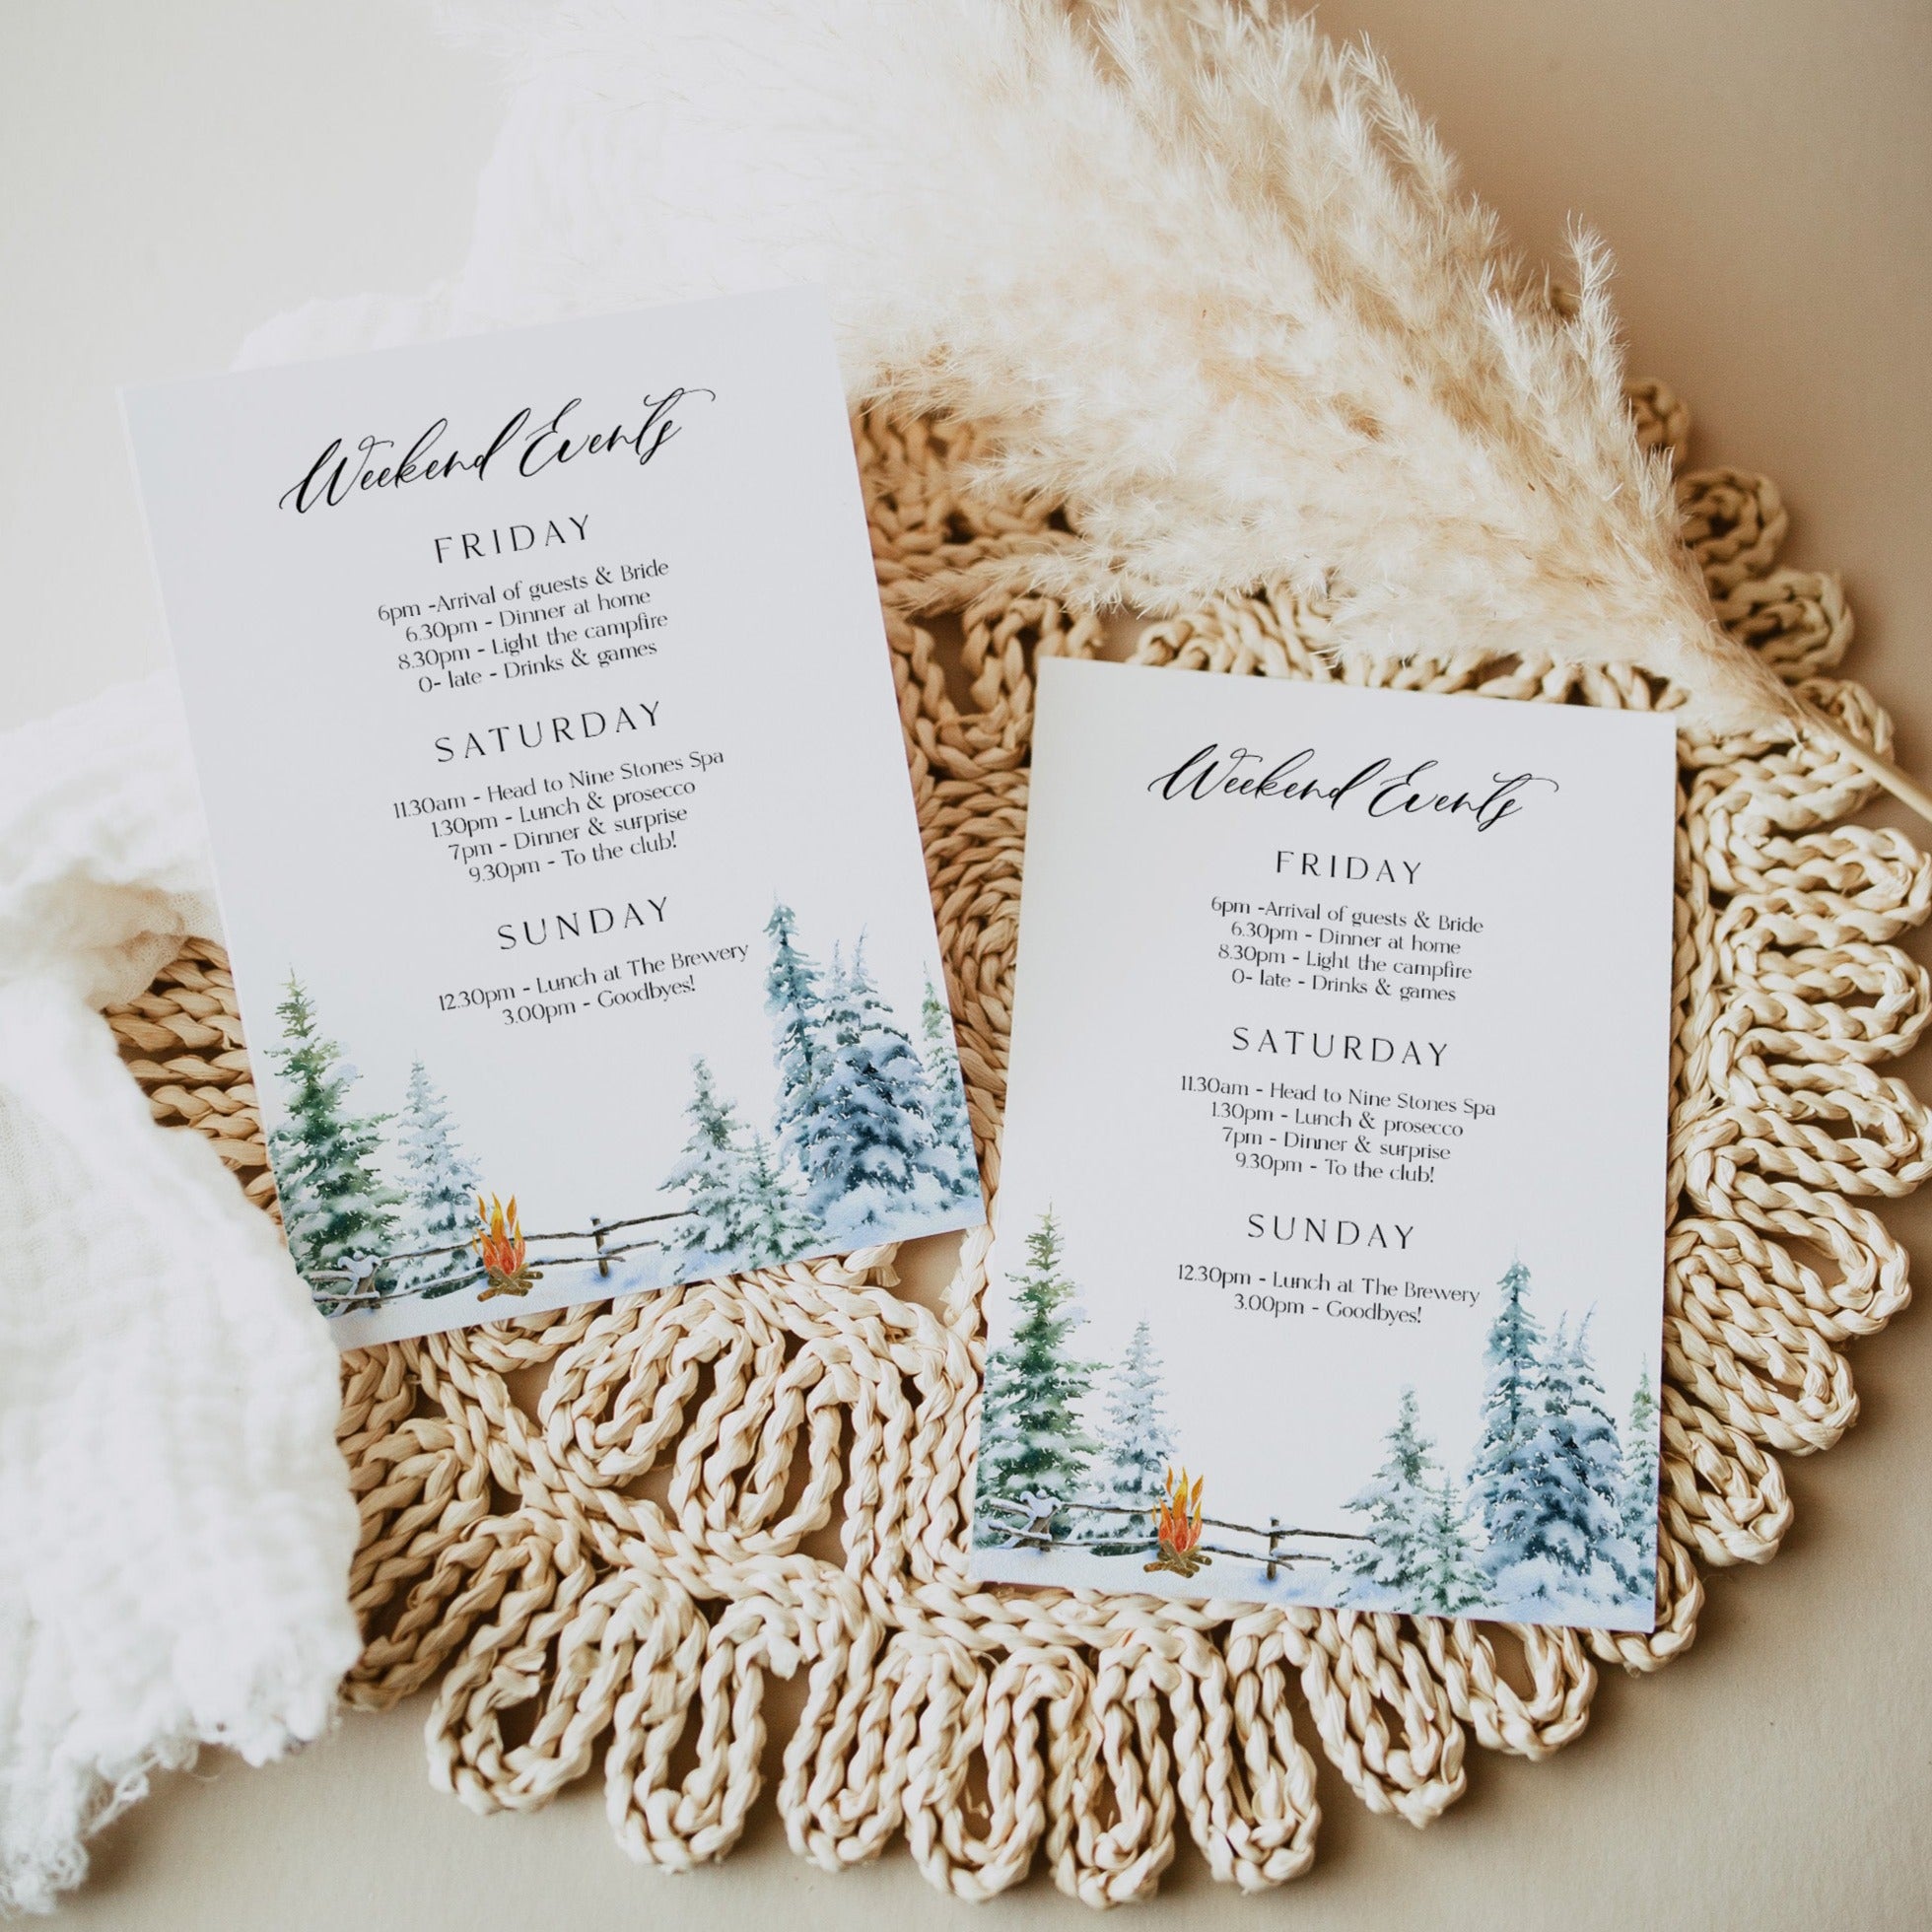 Fully editable and printable mountain cabin invitation with a mountain design. Perfect for a snowy cabin mountain bridal shower